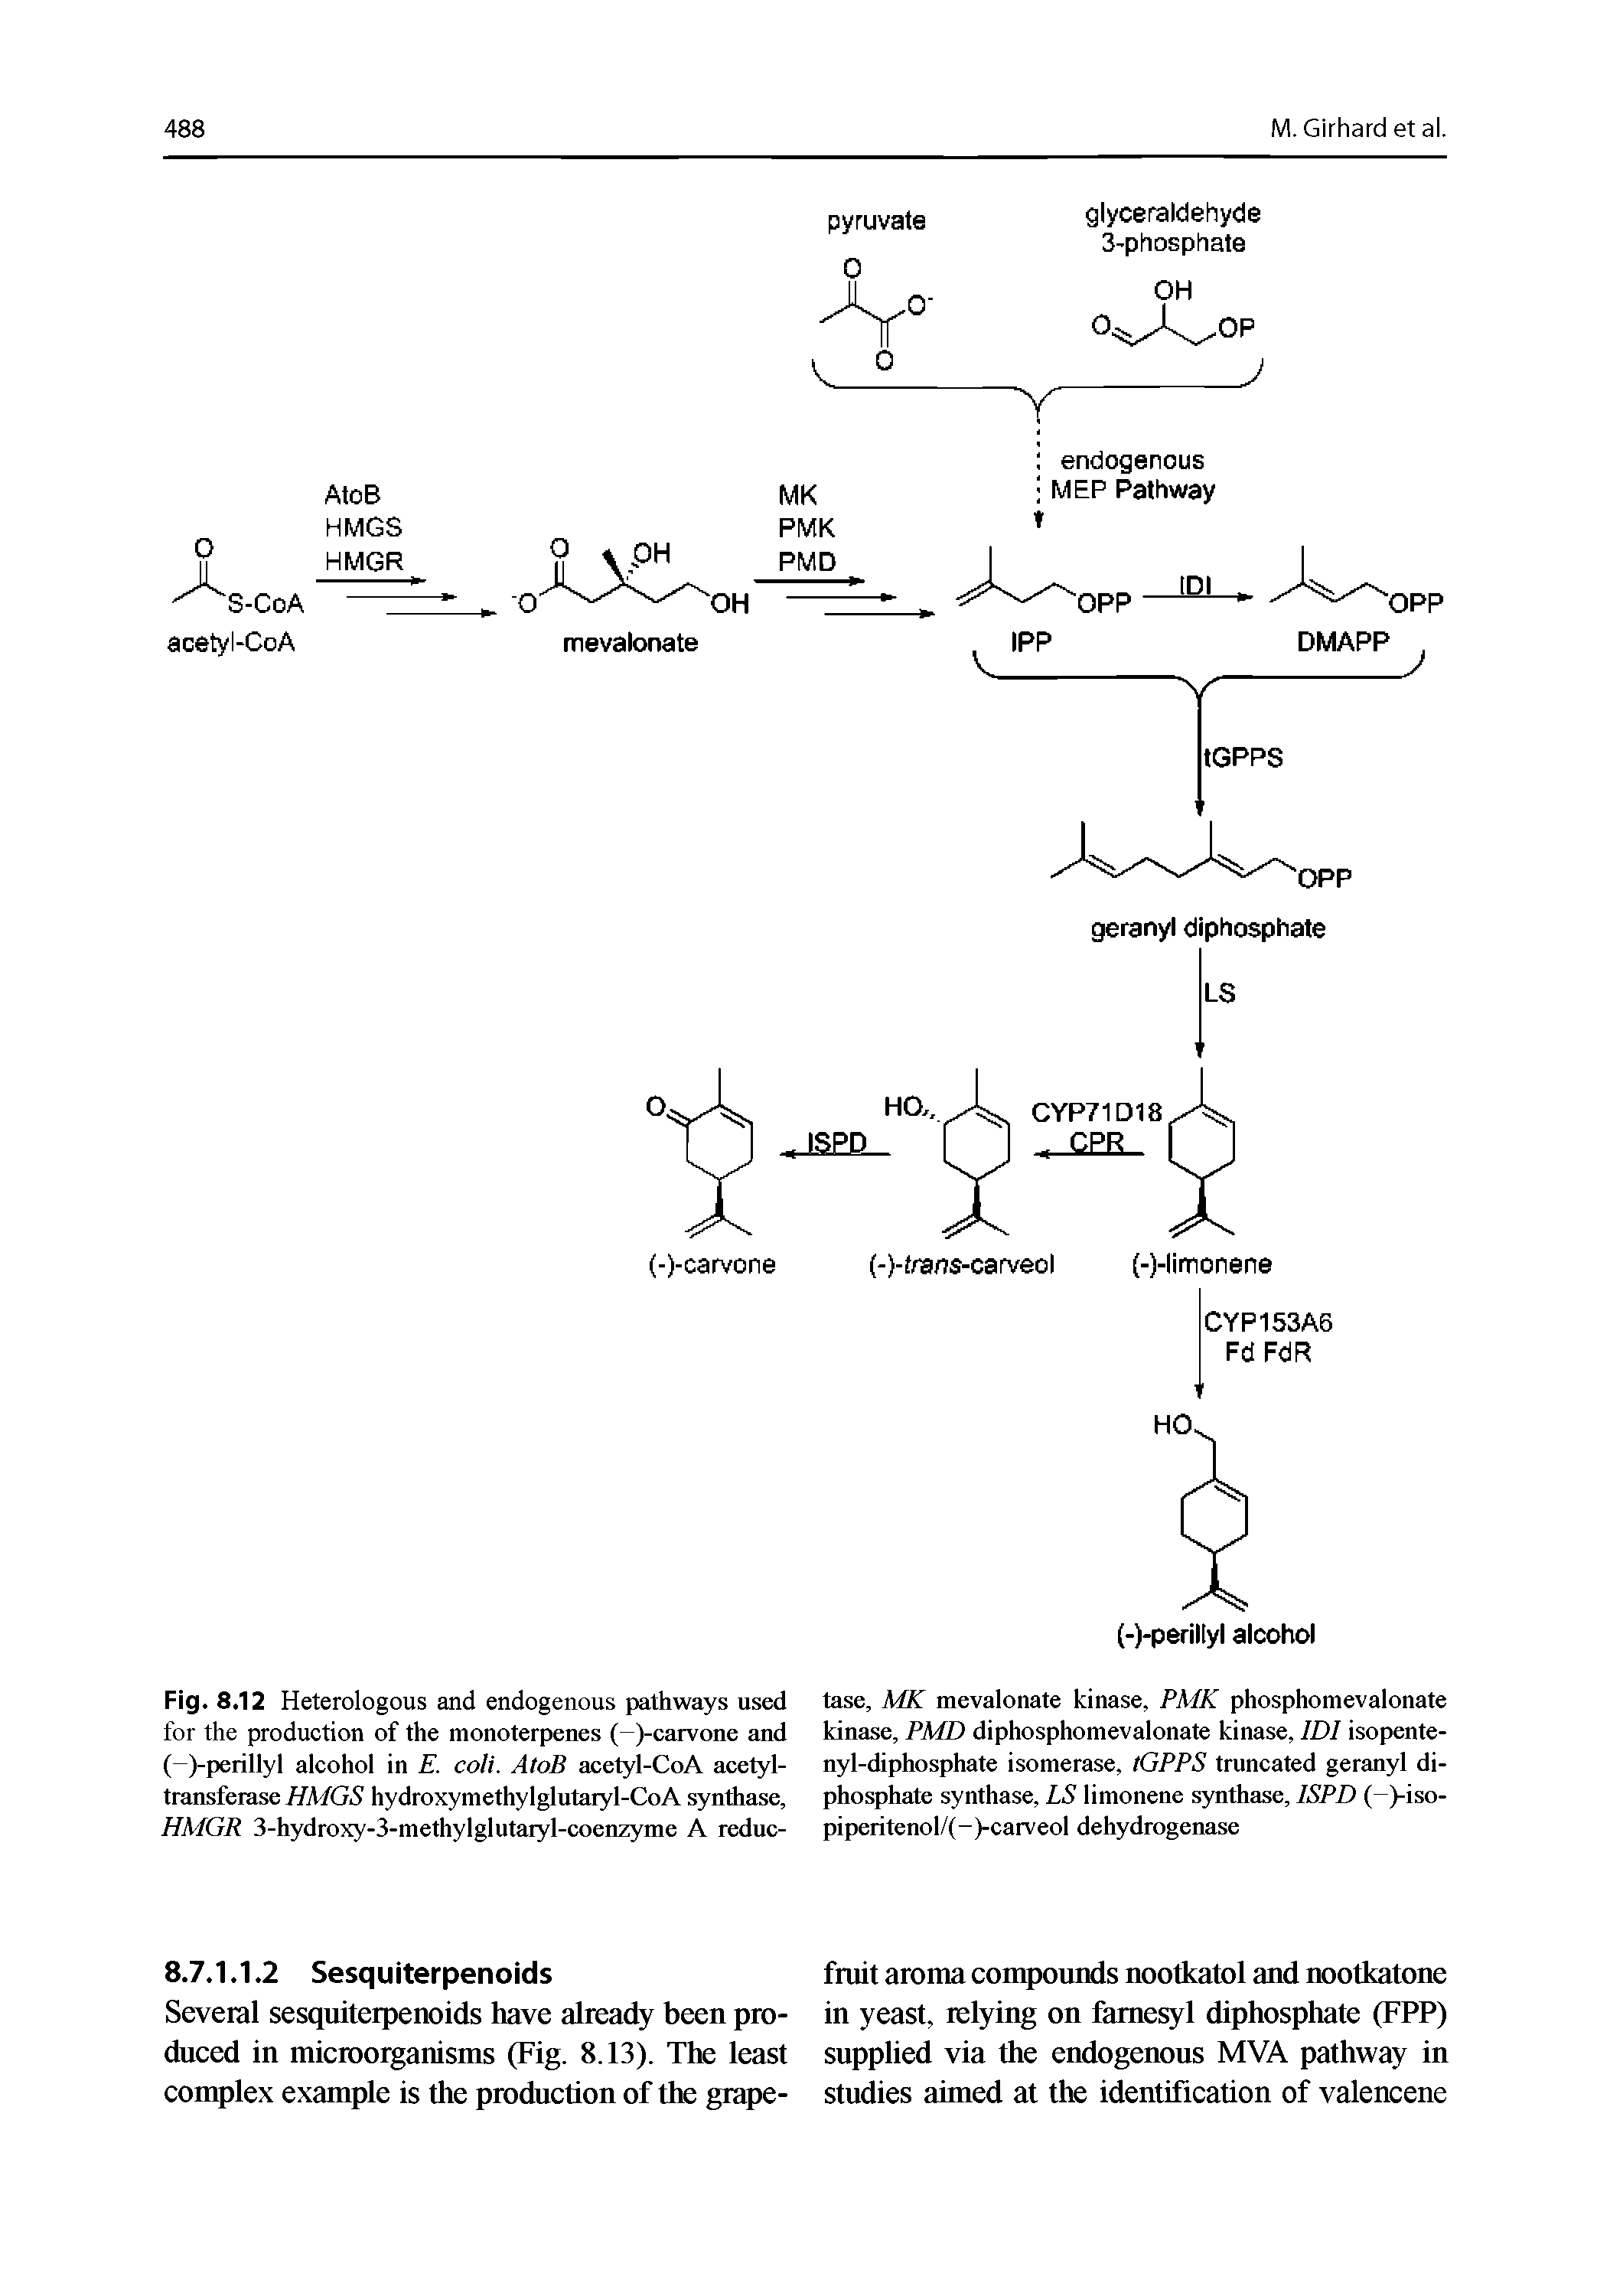 Fig. 8.12 Heterologous and endogenous pathways used for the produetion of the monoterpenes (-)-carvone and ( )-perillyl alcohol in E. coli. AtoB acetyl-CoA acetyl-transfeiasehydroxymethylglutaiyl-CoA synthase, HMGR 3-hydroxy-3-methylglutaryl-coenzyme A reduc-...